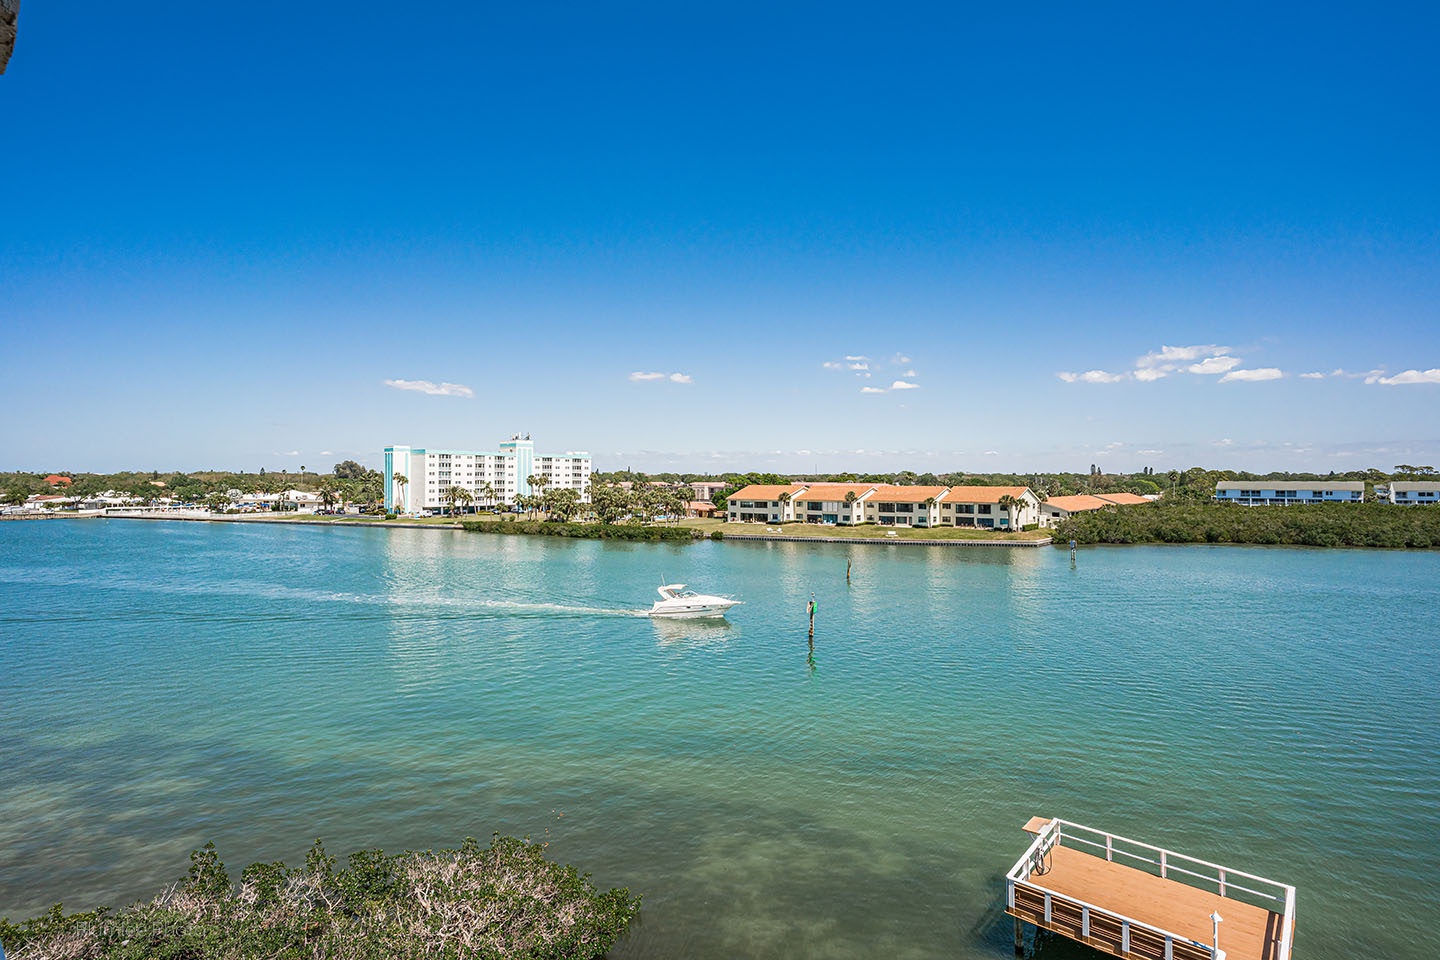 Watch the boats go by on the Intracoastal Waterway.